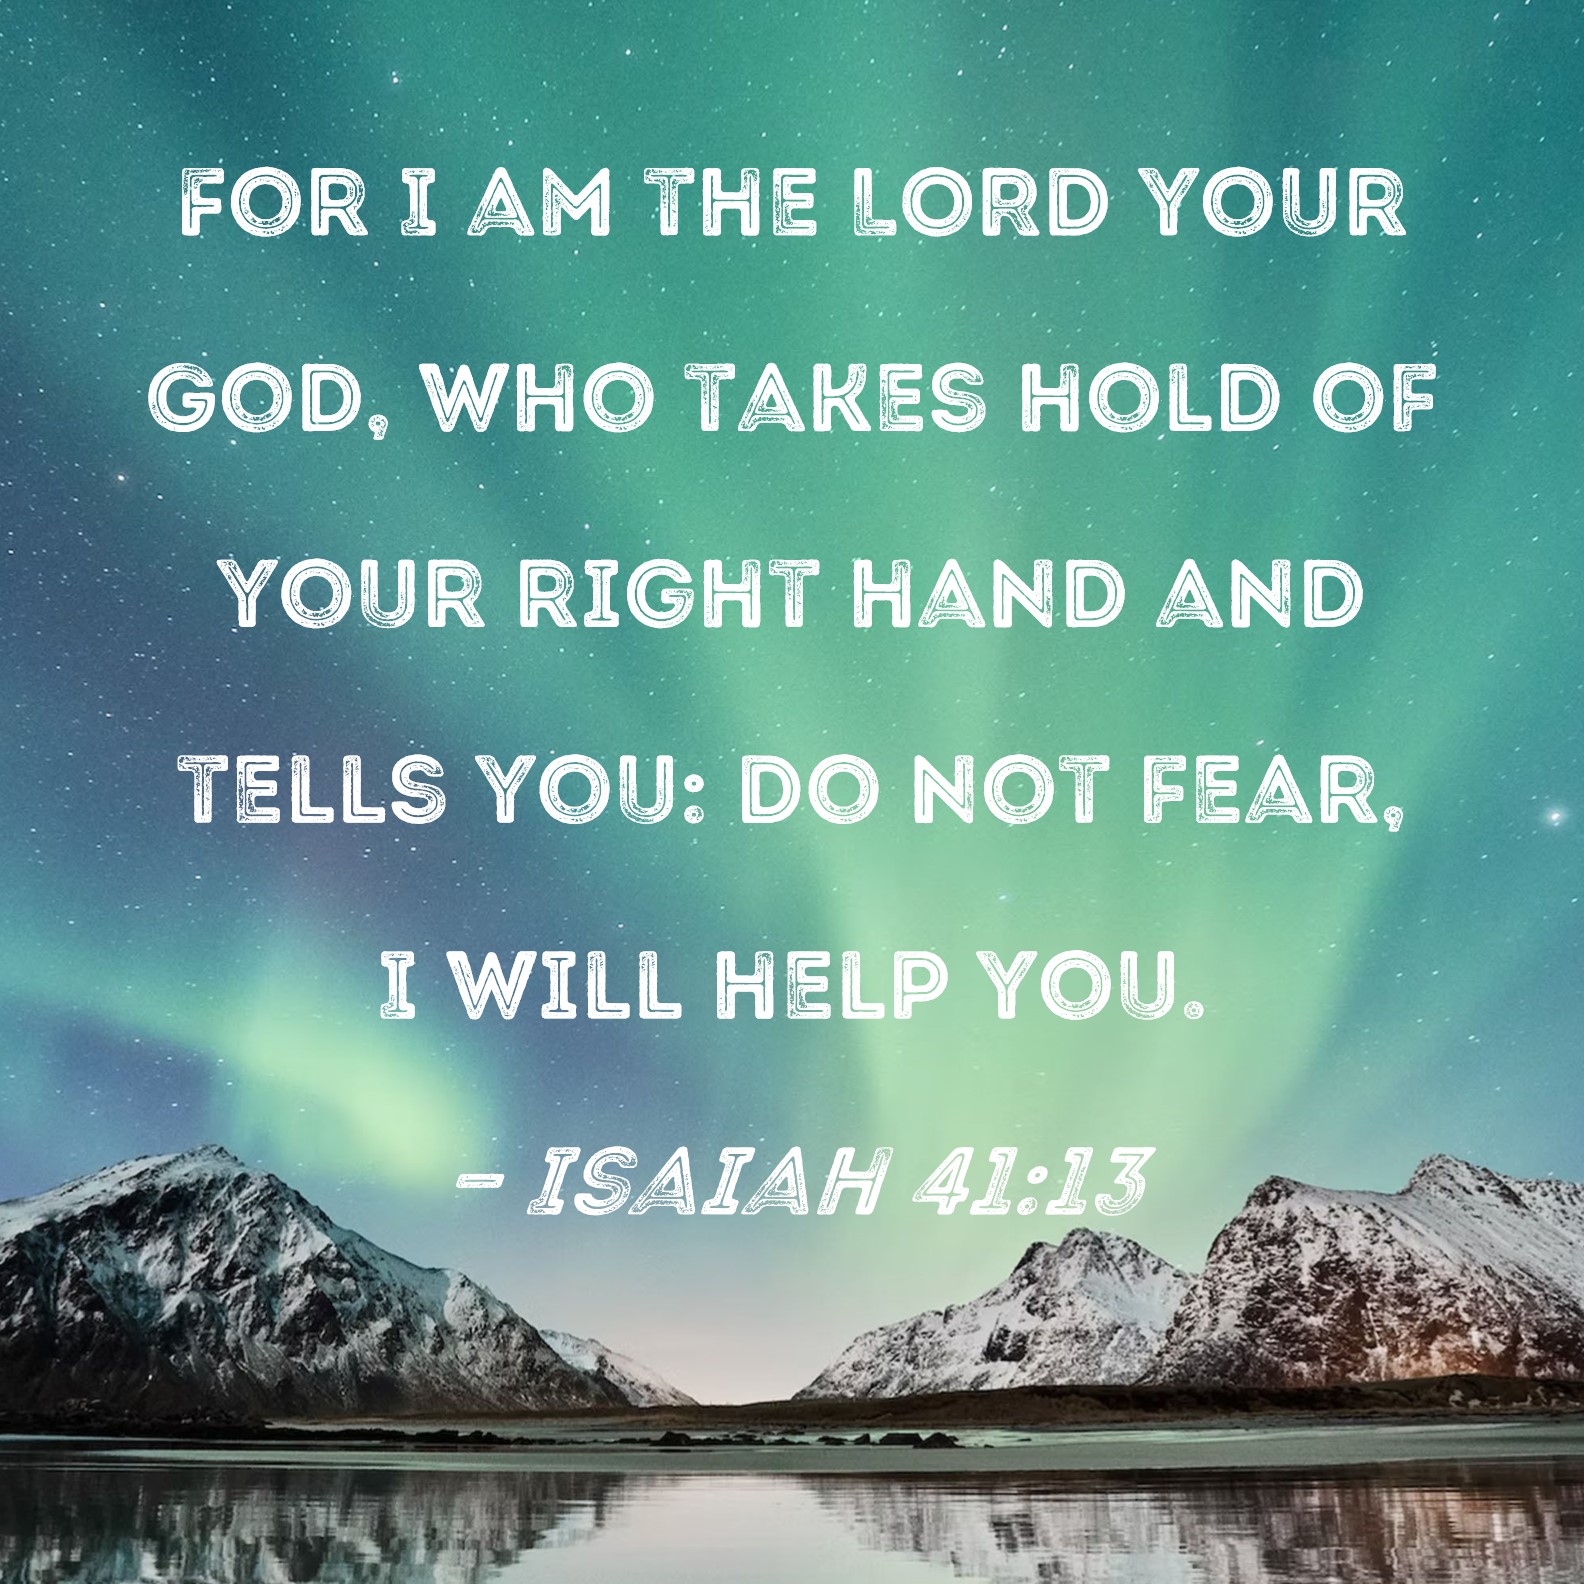 Isaiah 41:13 For I am the LORD your God, who takes hold of your right hand  and tells you: Do not fear, I will help you.